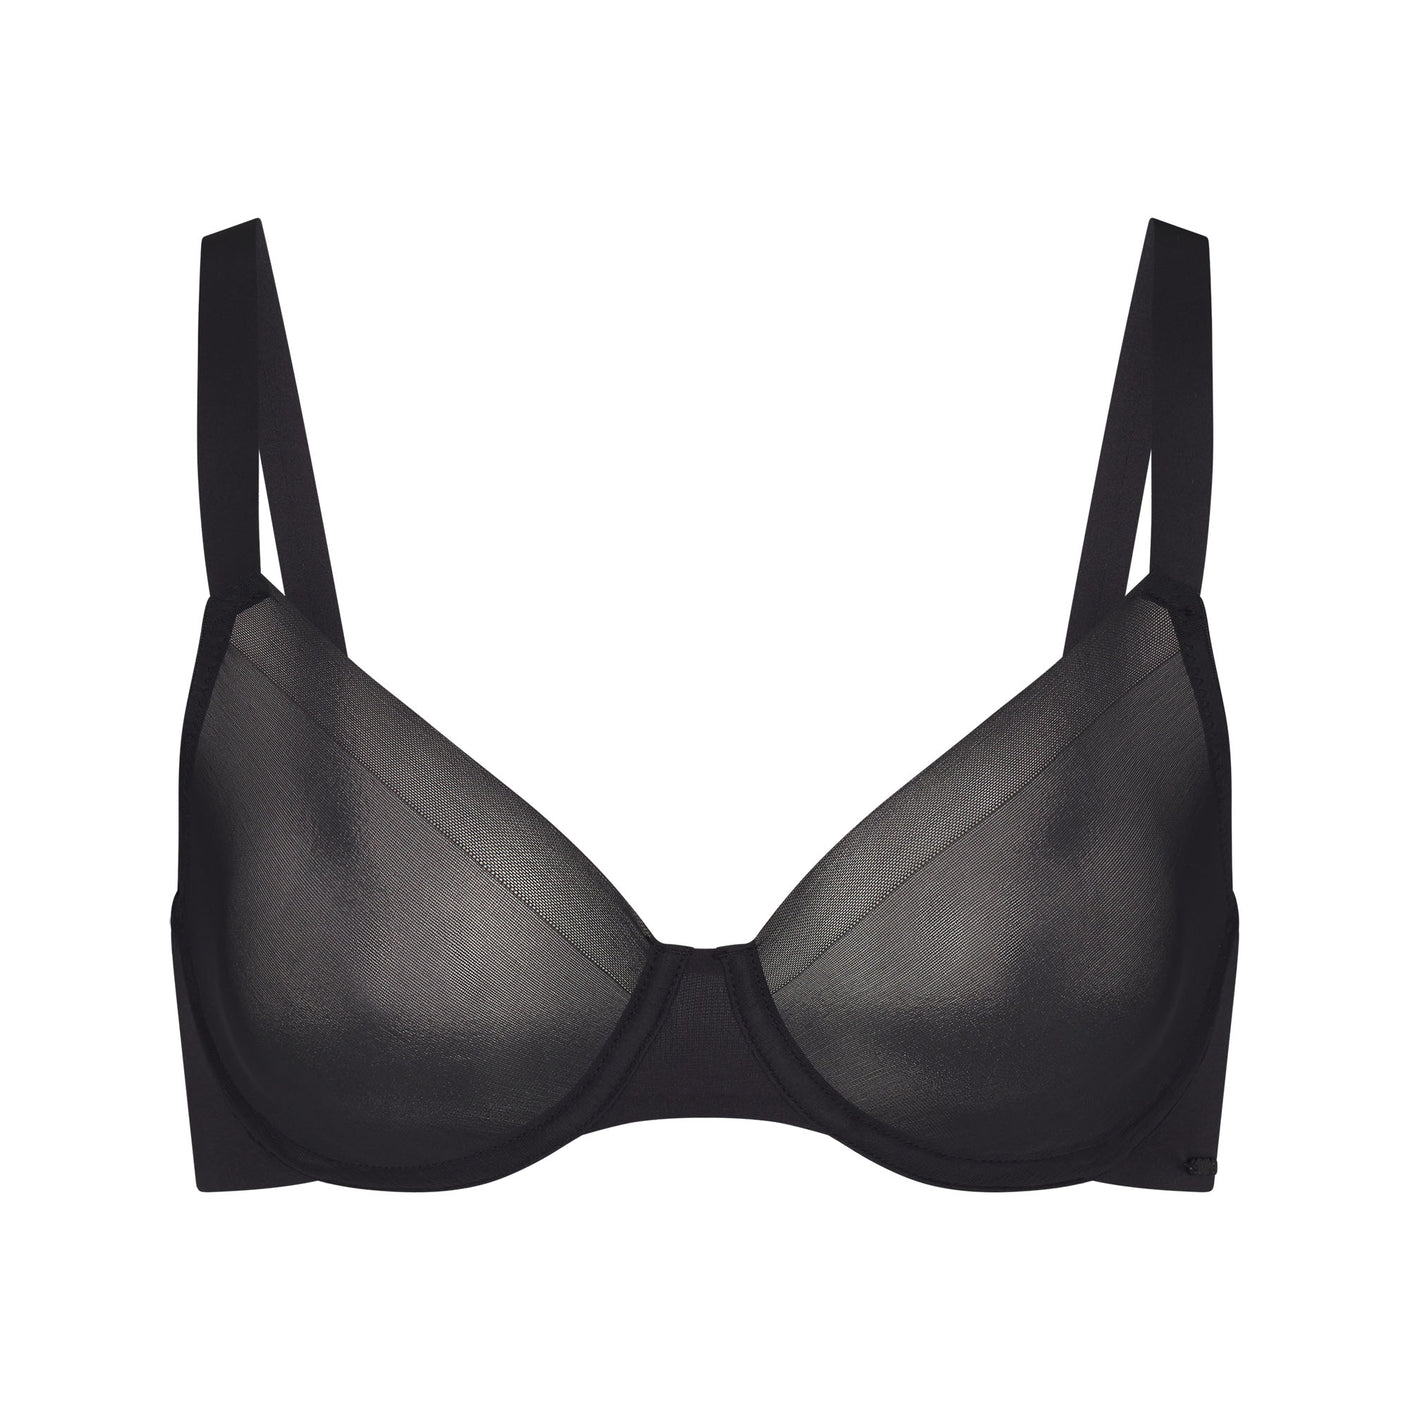 SMOOTHING INTIMATES UNLINED FULL COVERAGE BRA | COCOA